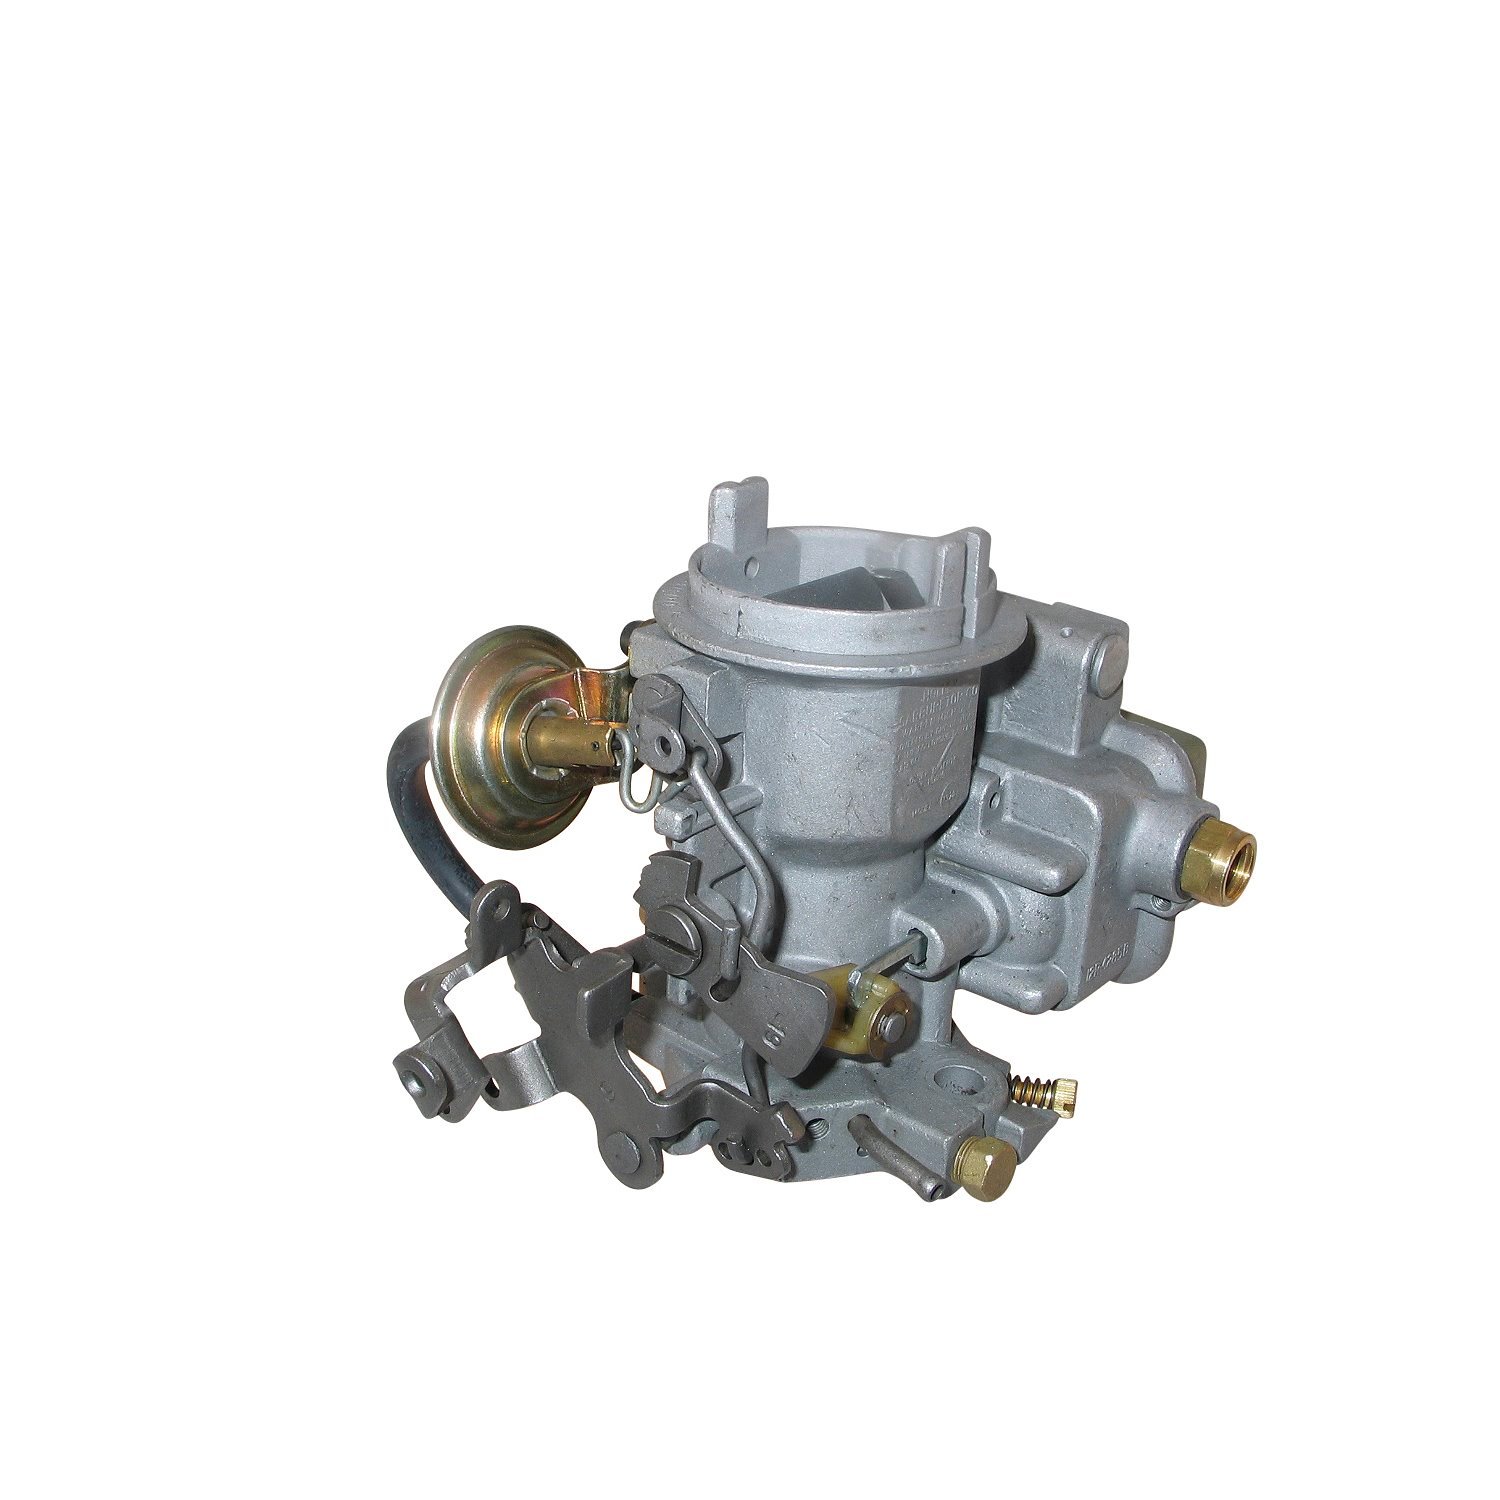 9-913 Holley Remanufactured Carburetor, 1920-Style